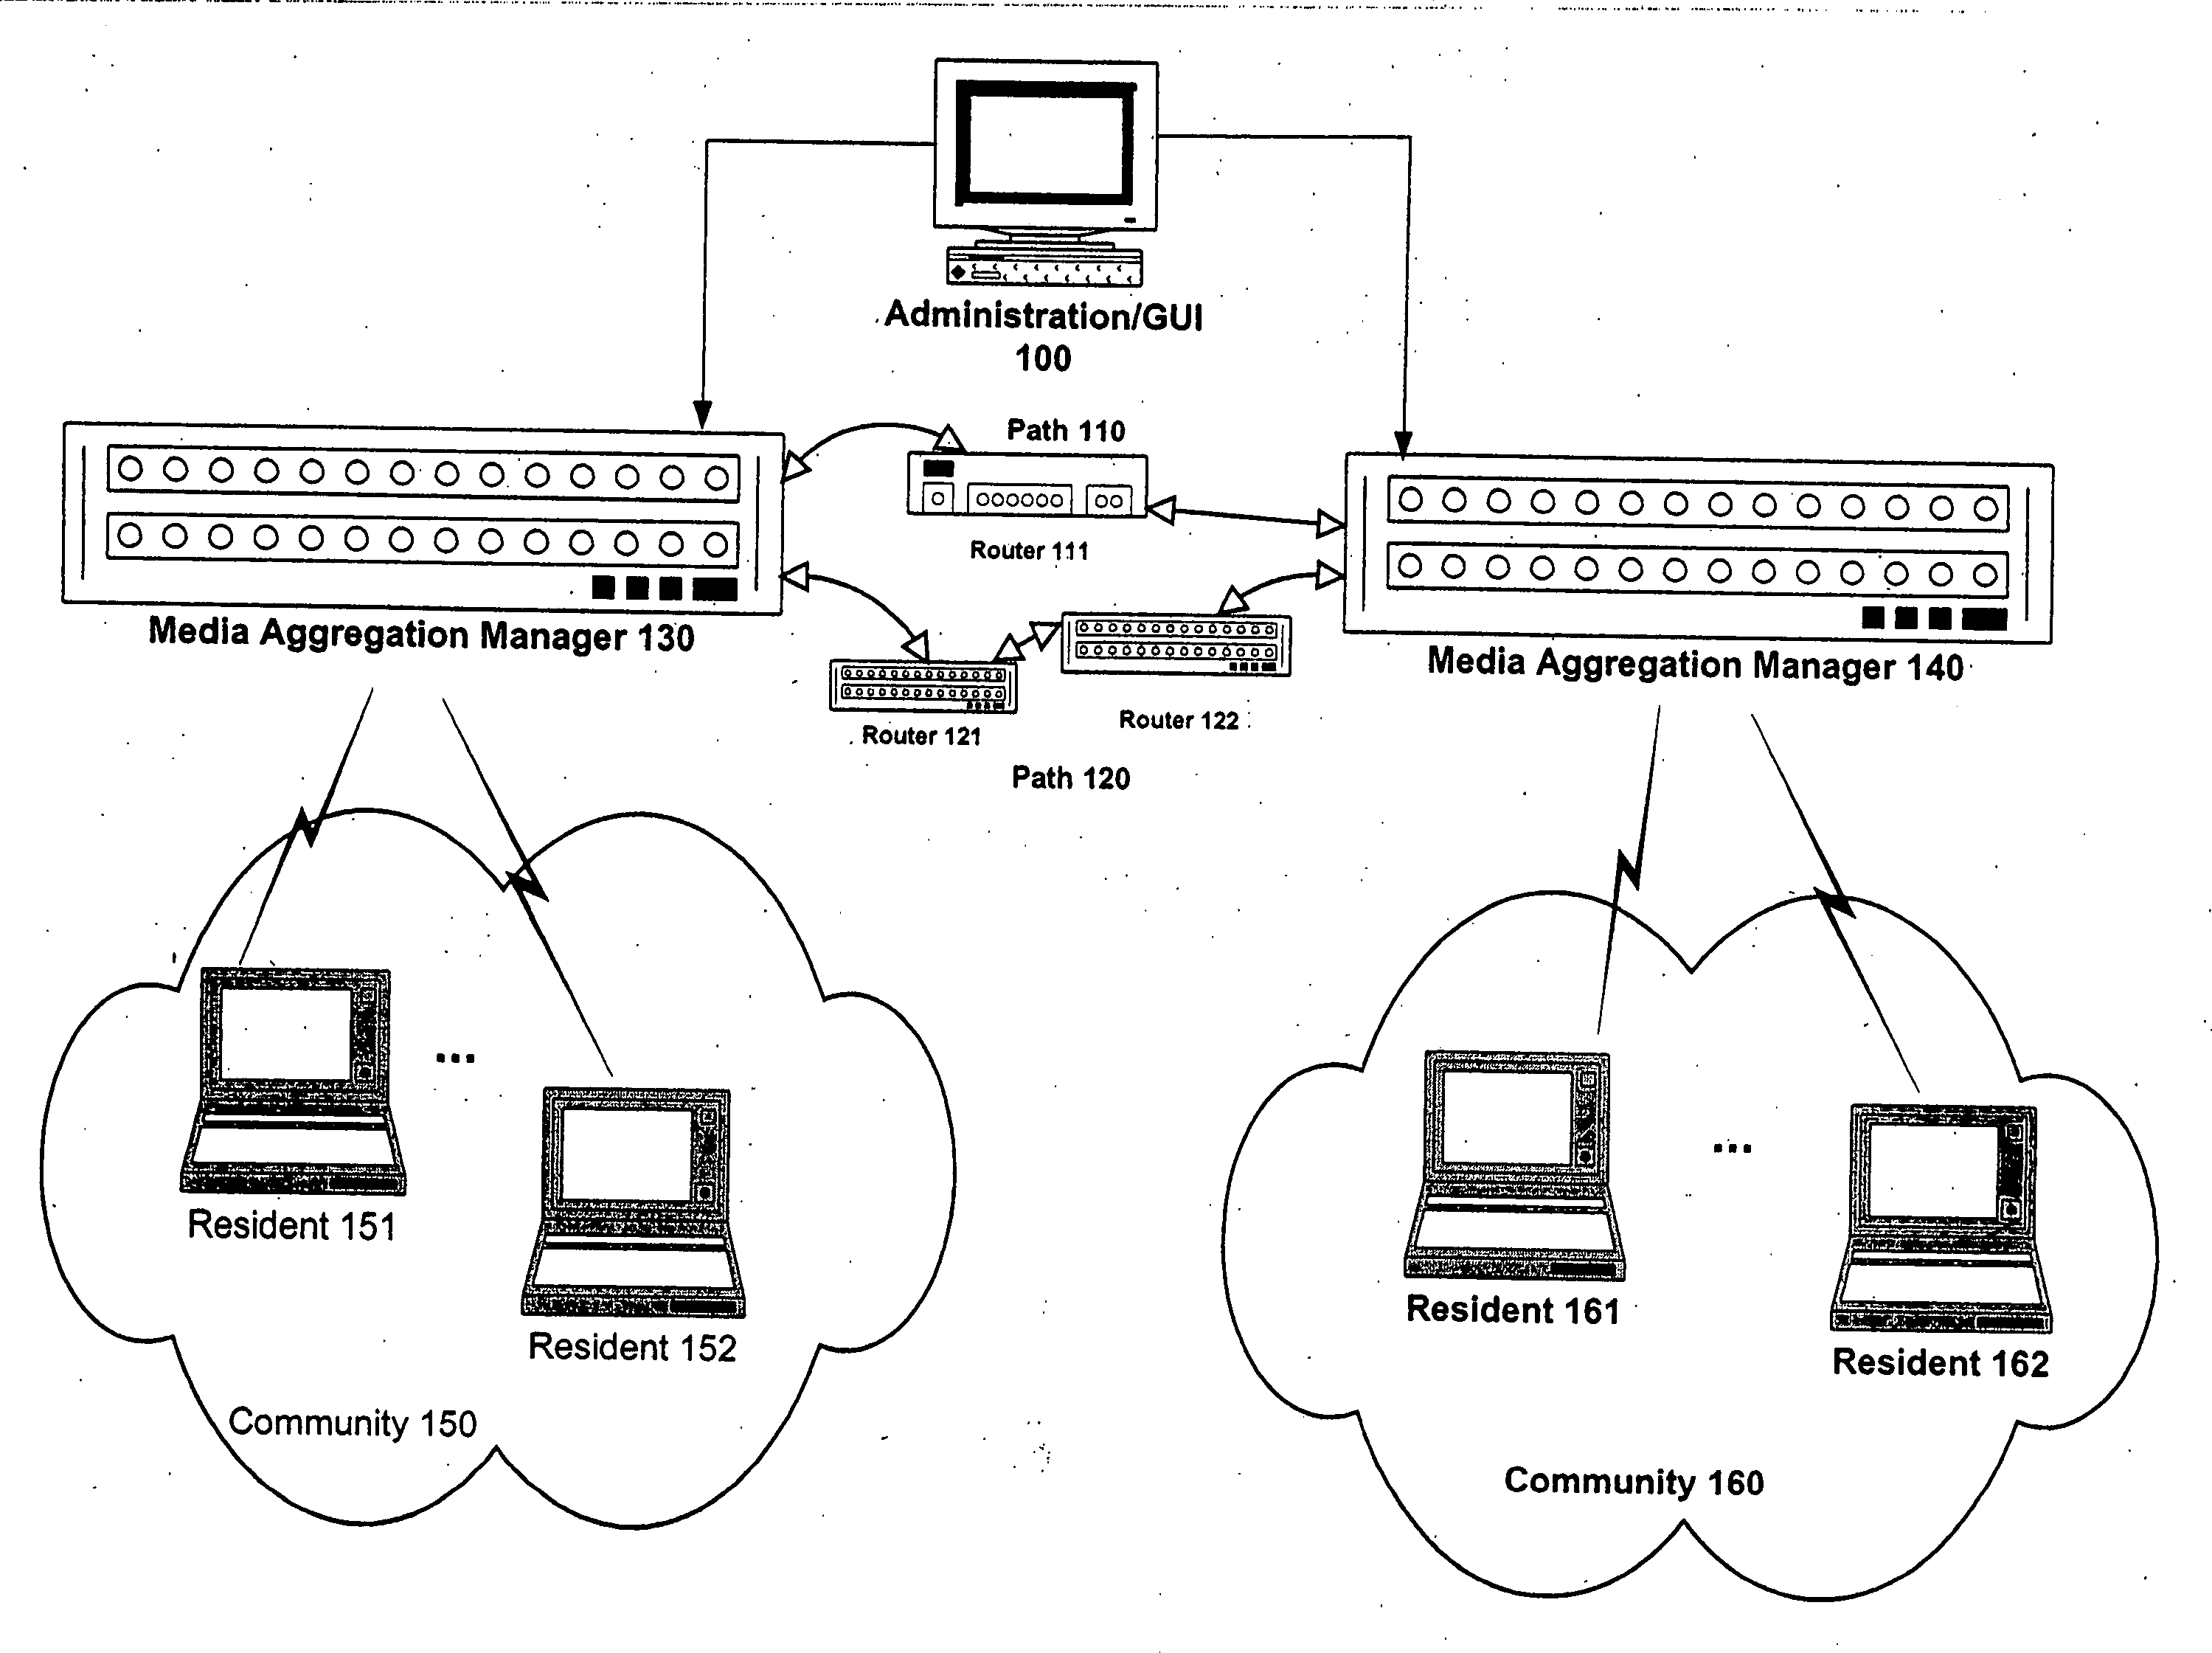 Administering a communication network